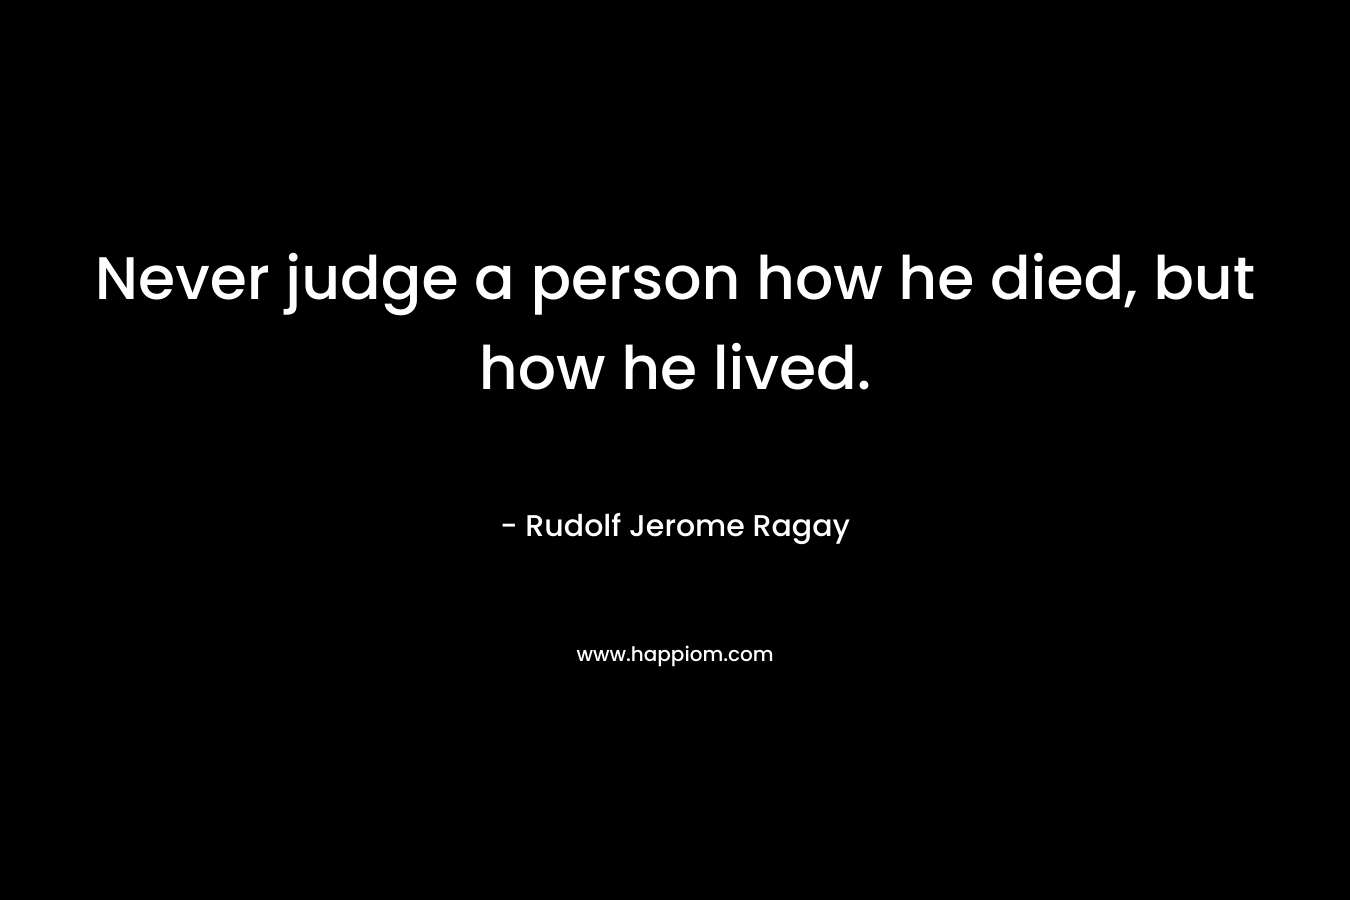 Never judge a person how he died, but how he lived. – Rudolf Jerome Ragay